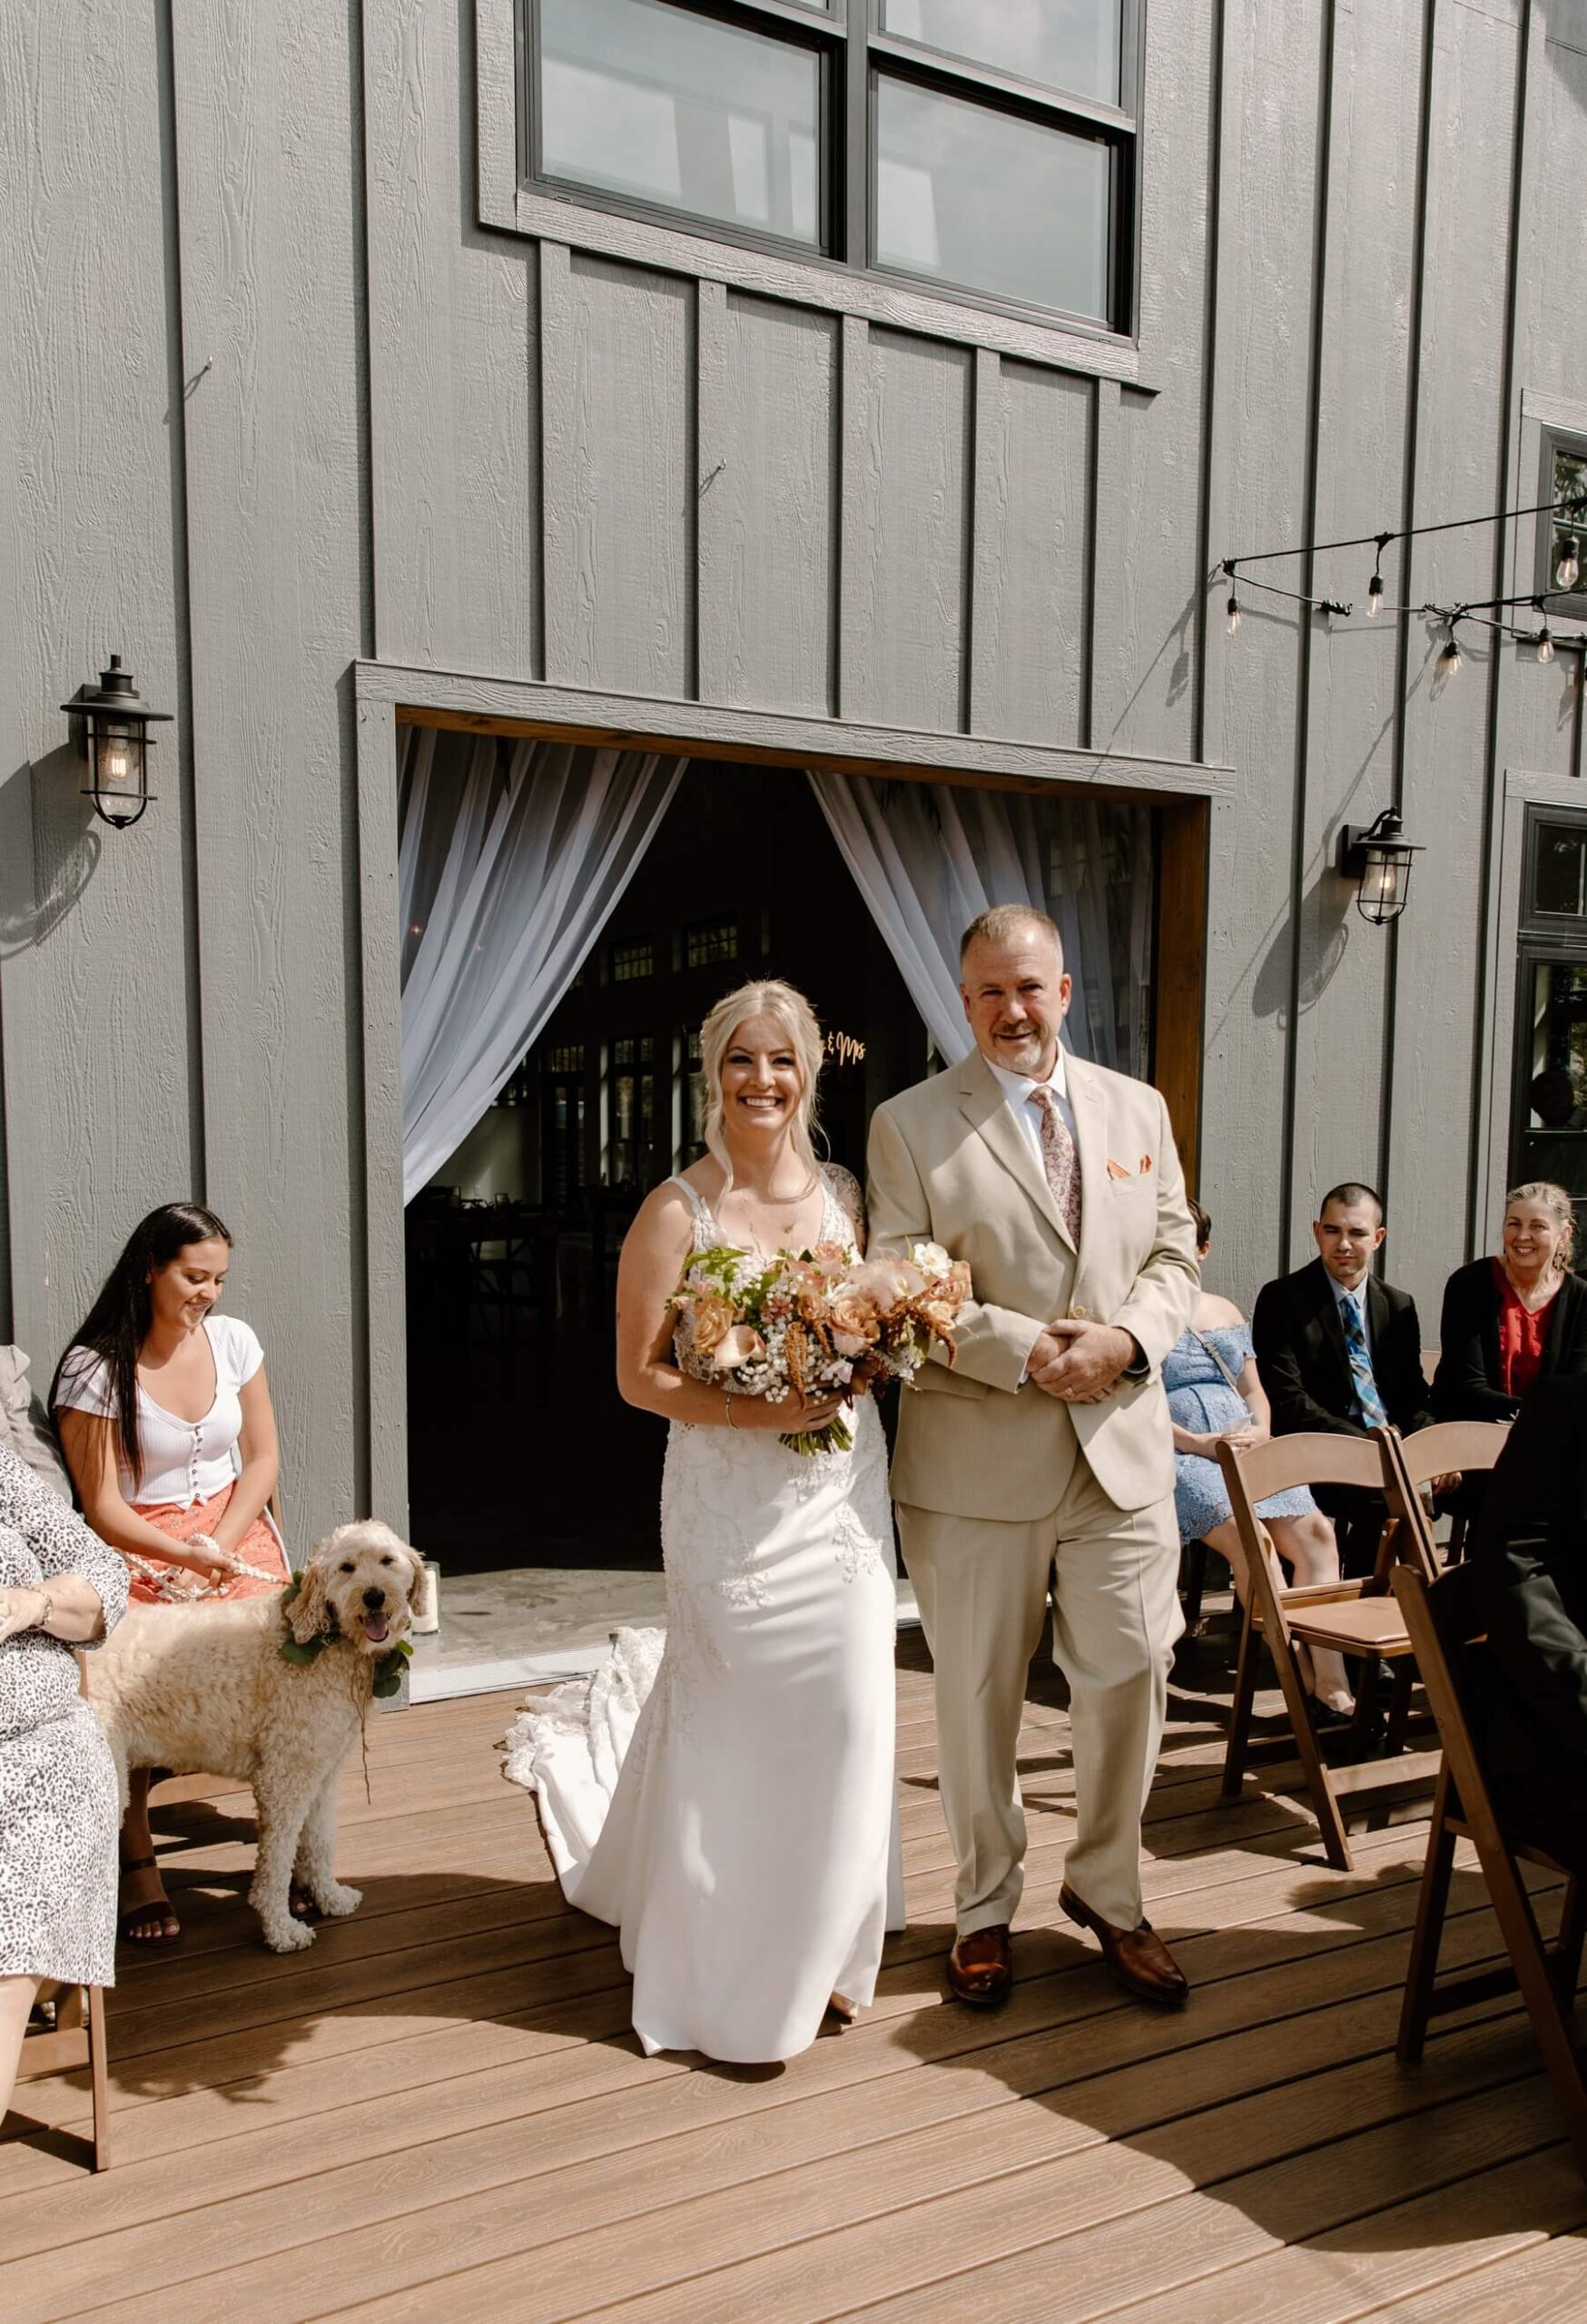 Bride walking down the aisle with father while her dog looks on | McArthur Weddings and Events